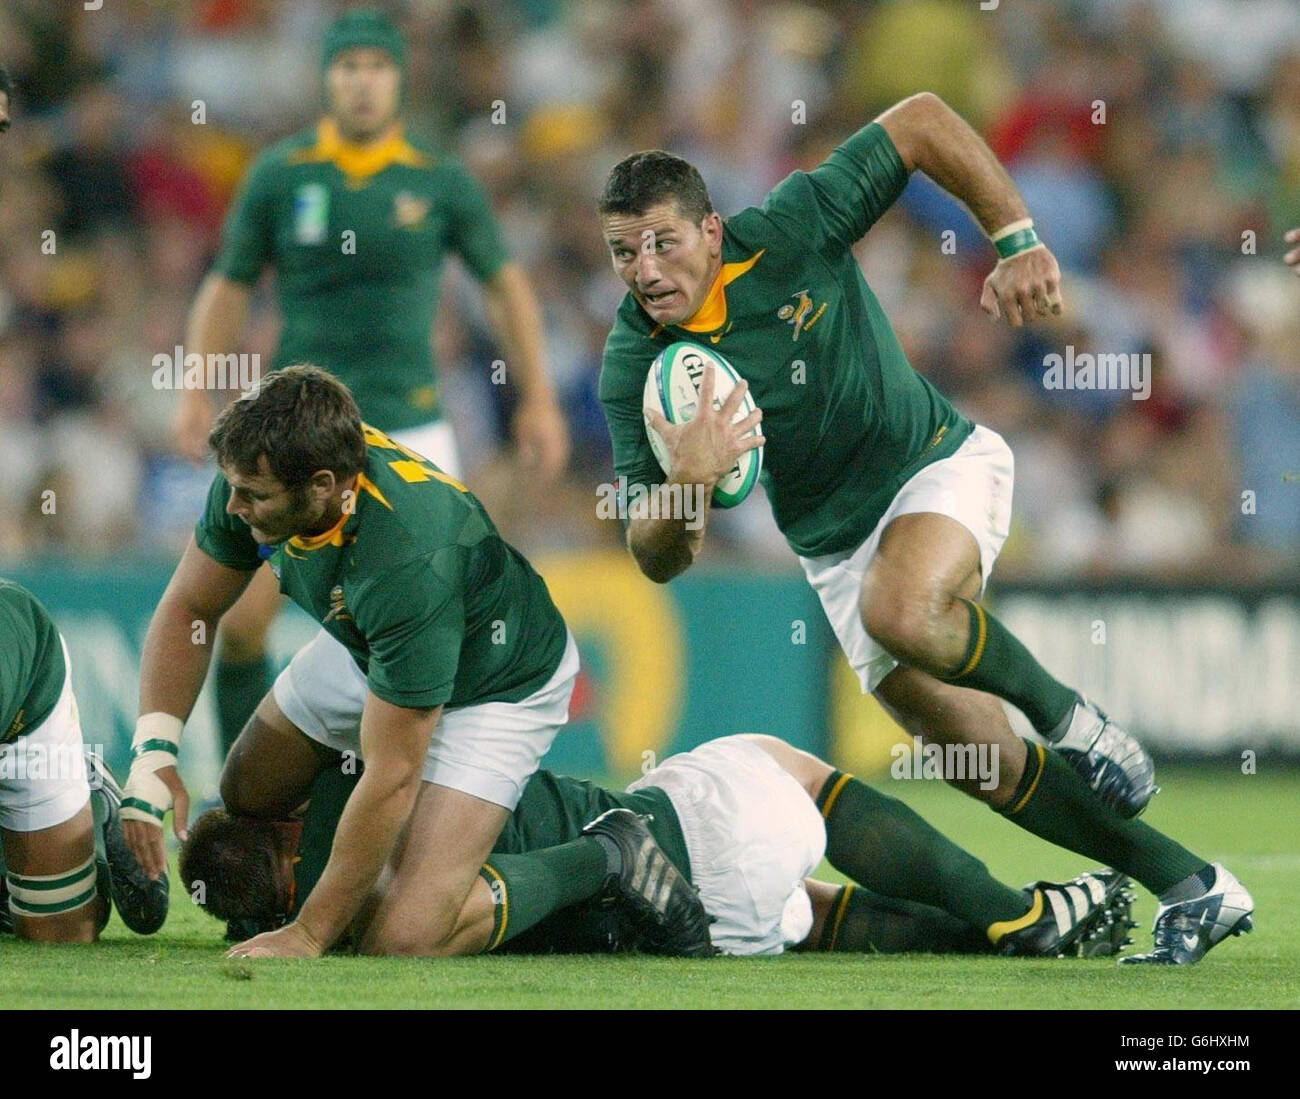 South Africa's Joost van der Westhuizen runs with the ball during the Rugby World Cup match at the Suncorp Stadium in Brisbane, Australia. : Stock Photo